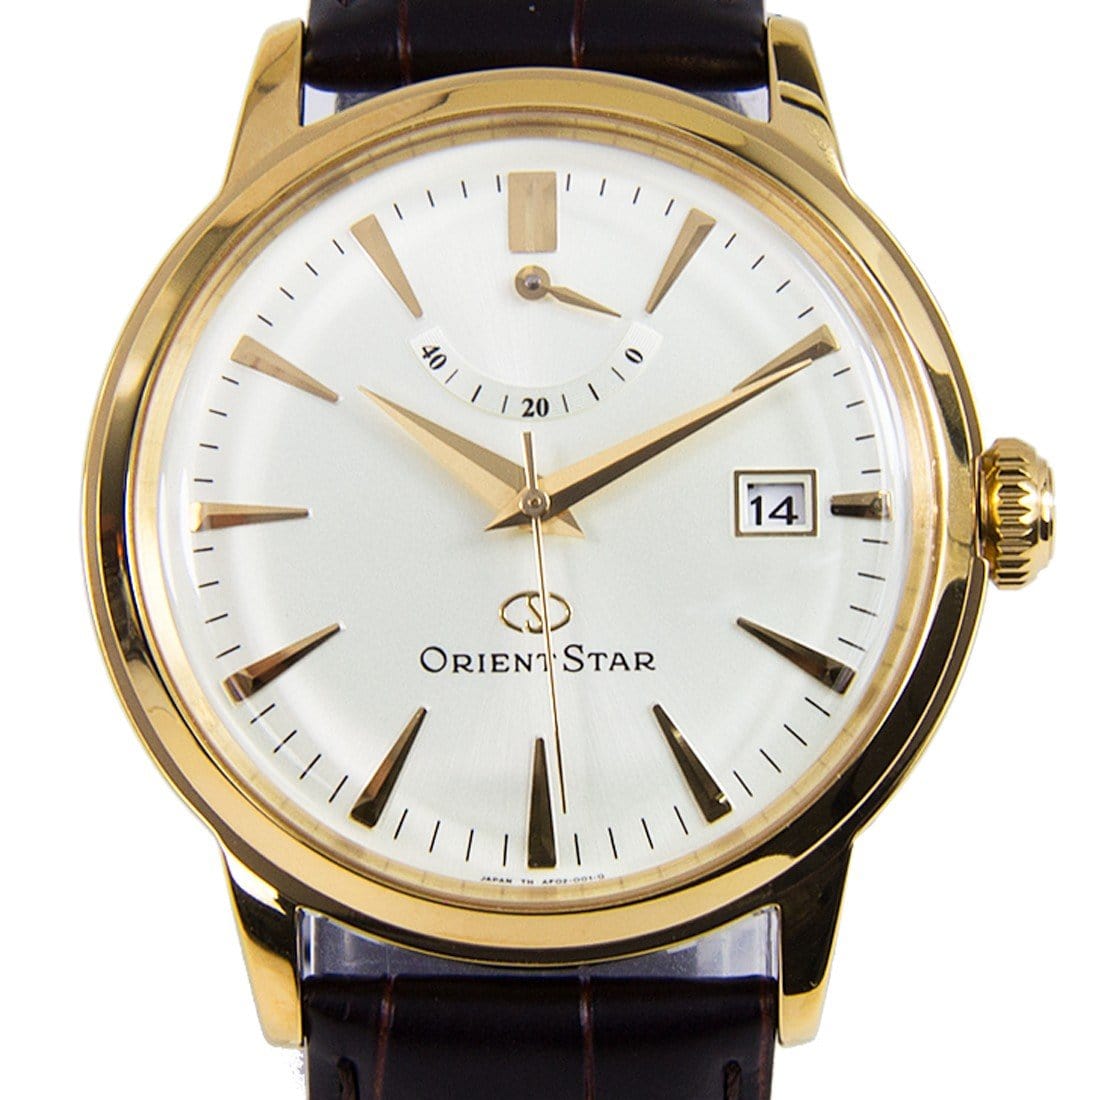 Orient Star Classic Automatic Power Reserve Mens Watch SAF02001S0 AF02001S